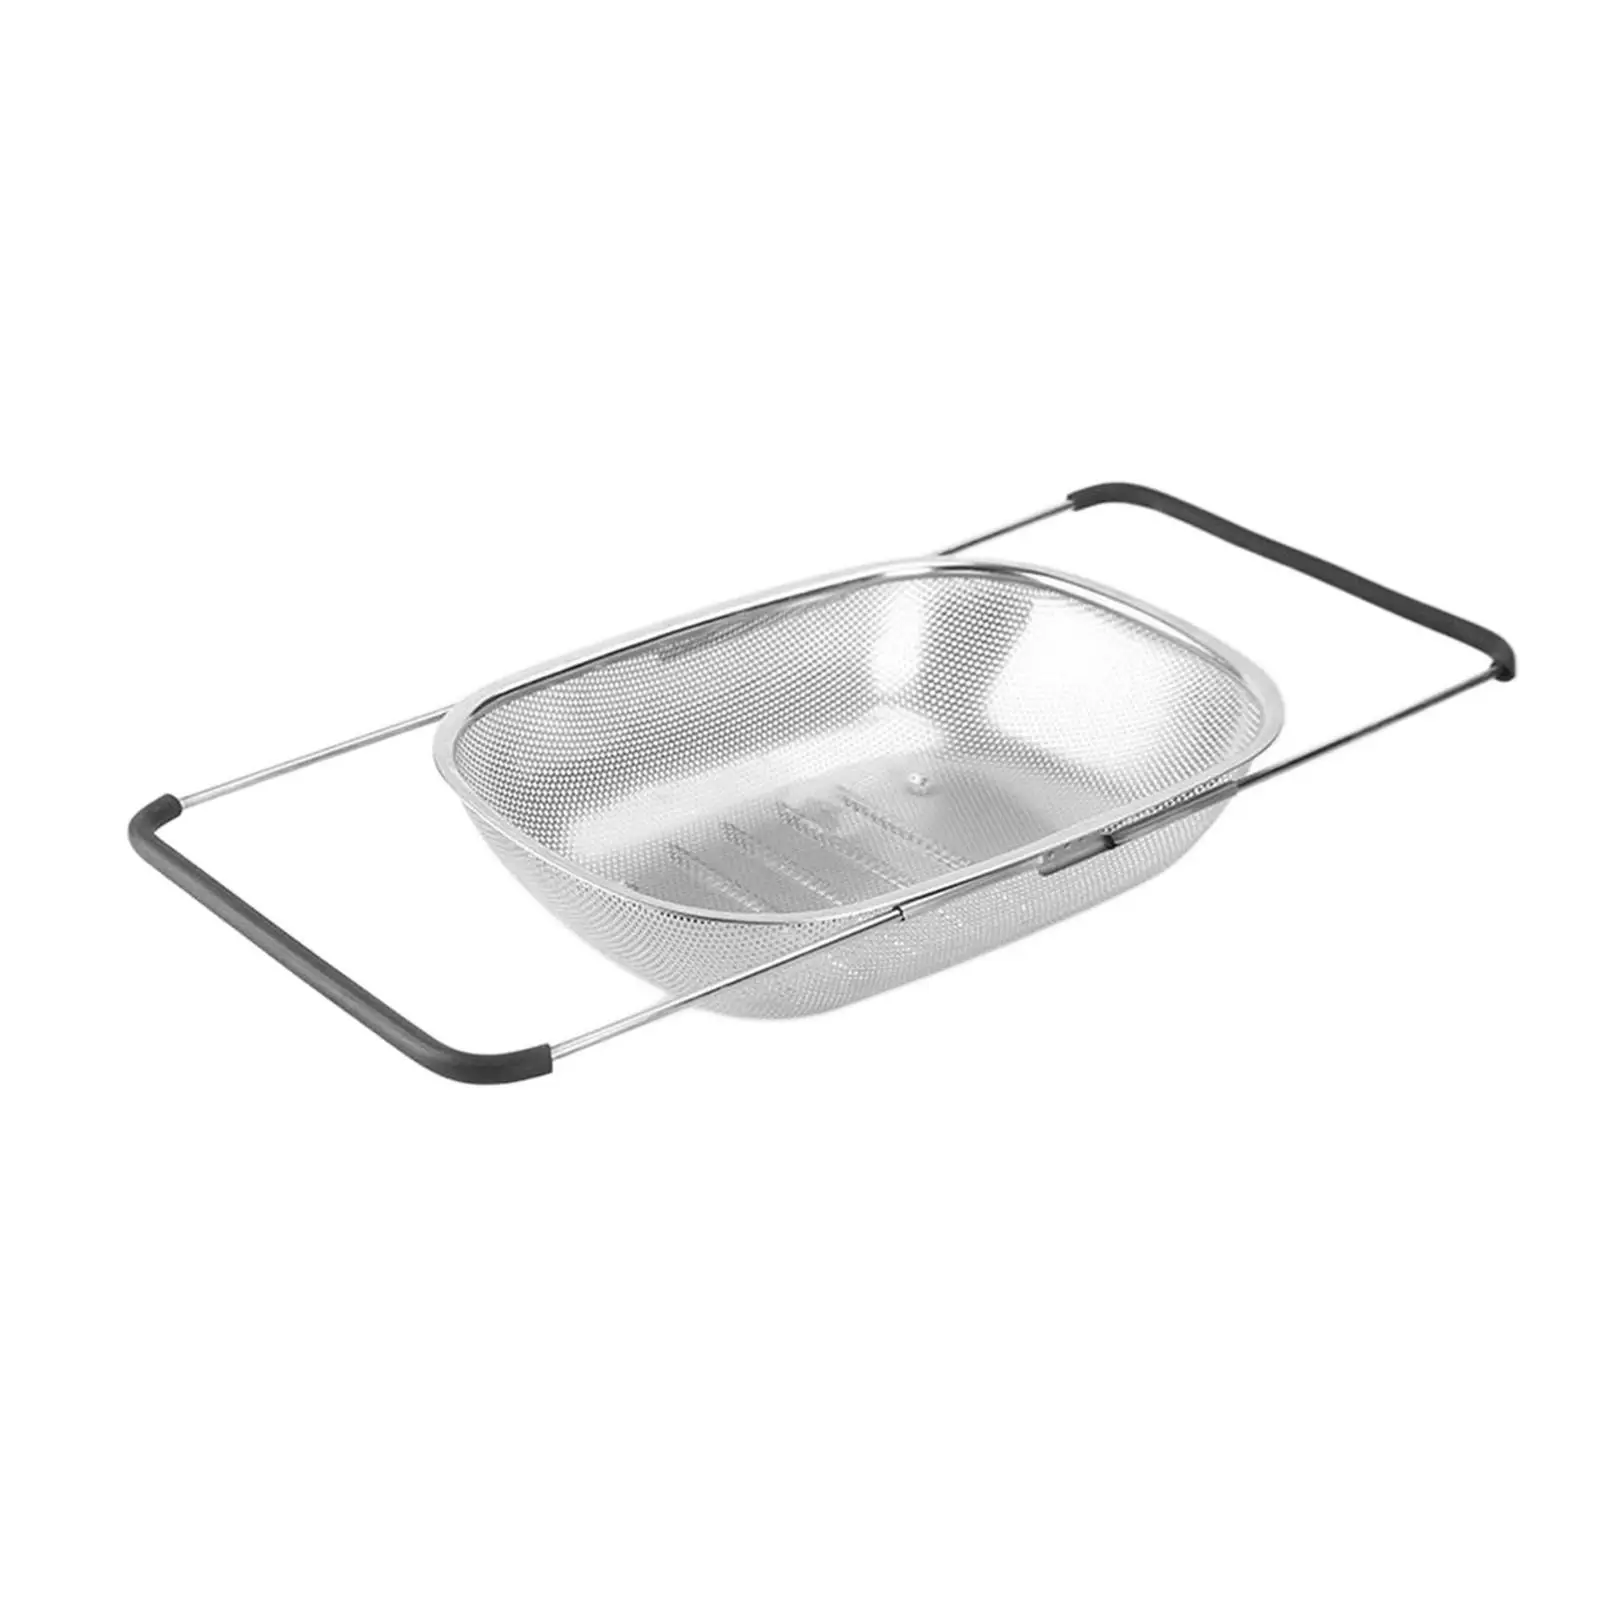 over The Sink Stainless Steel Strain, Drain, Rinse Fruits, Vegetables Easy to Clean Sturdy Strainer Basket Extendable Handles